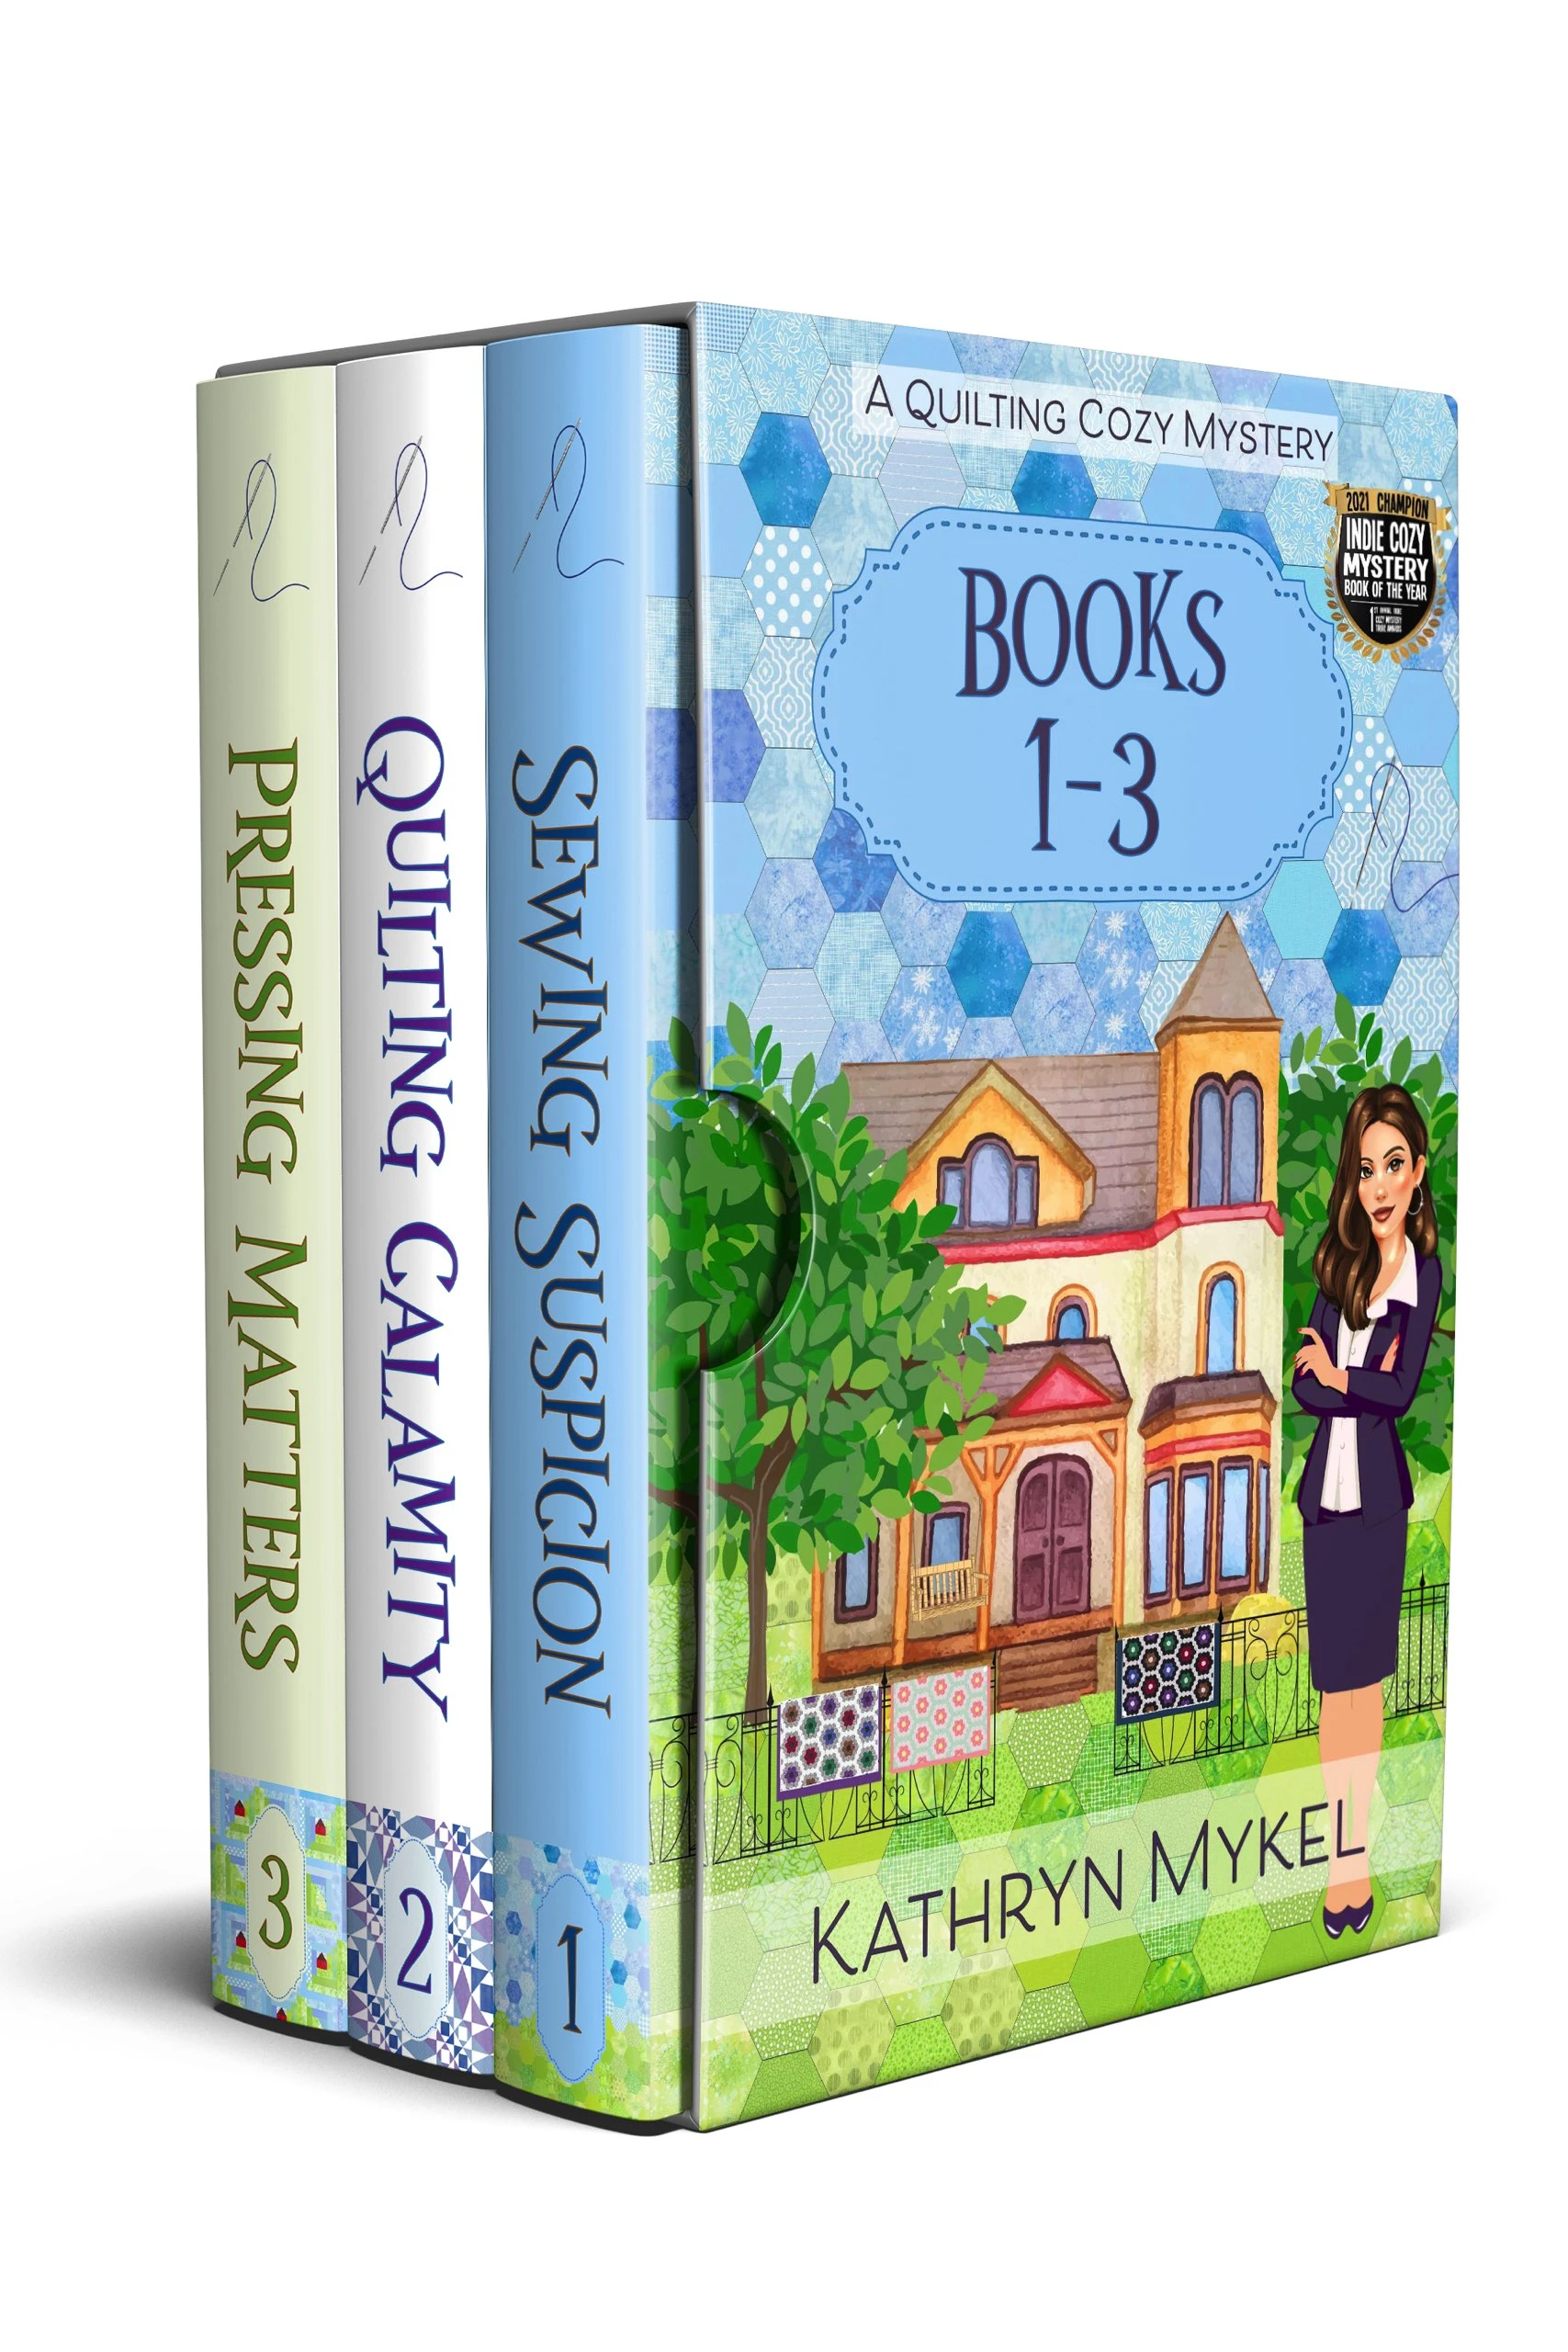 Quilting Cozy Mystery Series – Set 1 Books: 1-3: Sewing Suspicion, Quilting Calamity, Pressing Matters